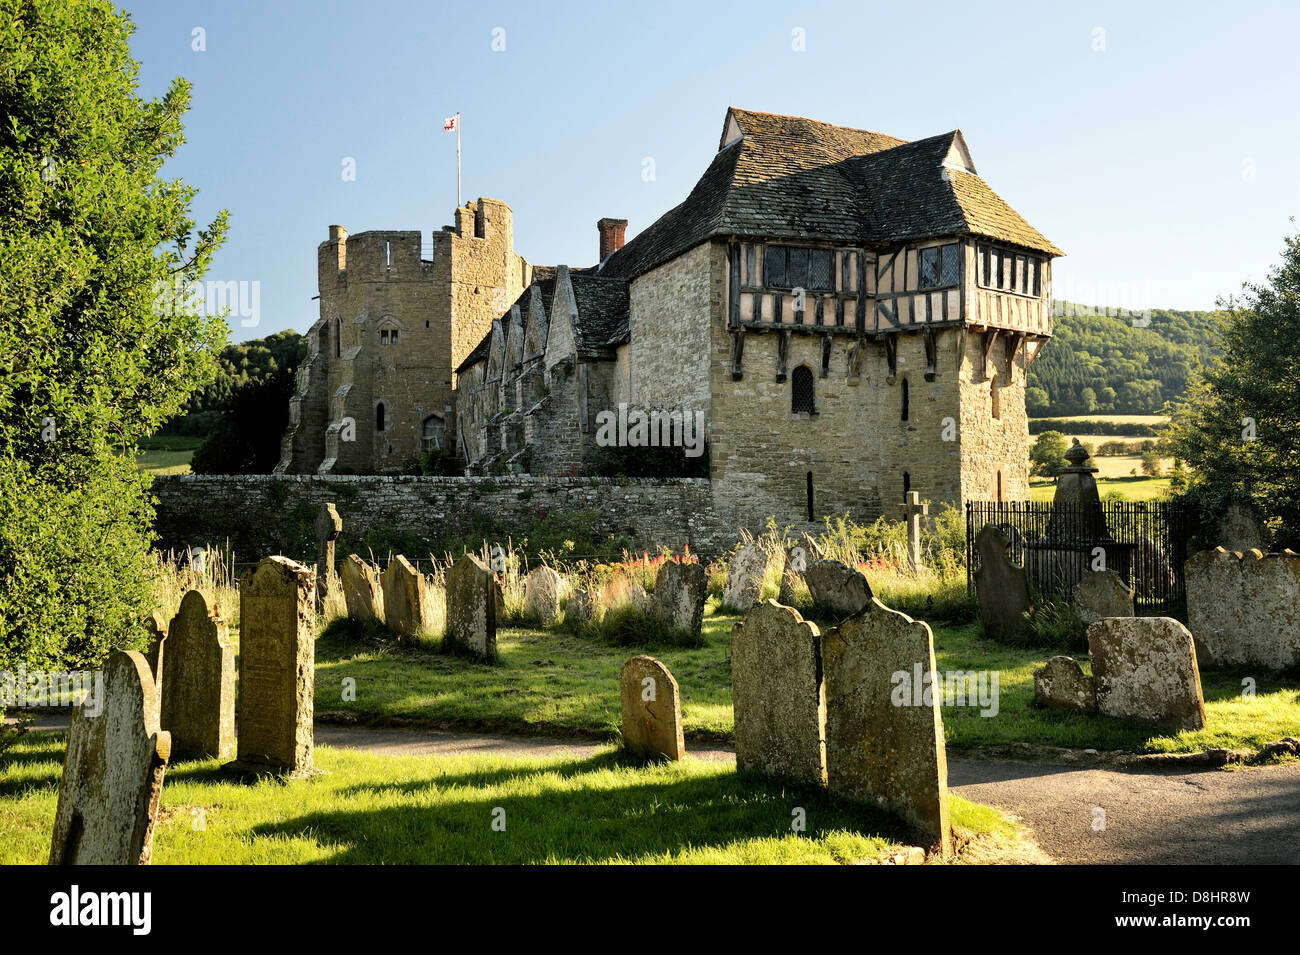 13C Stokesay Castle, Craven Arms, Shropshire England from Church of St. John. Timbered North Tower, banqueting hall, South Tower Stock Photo